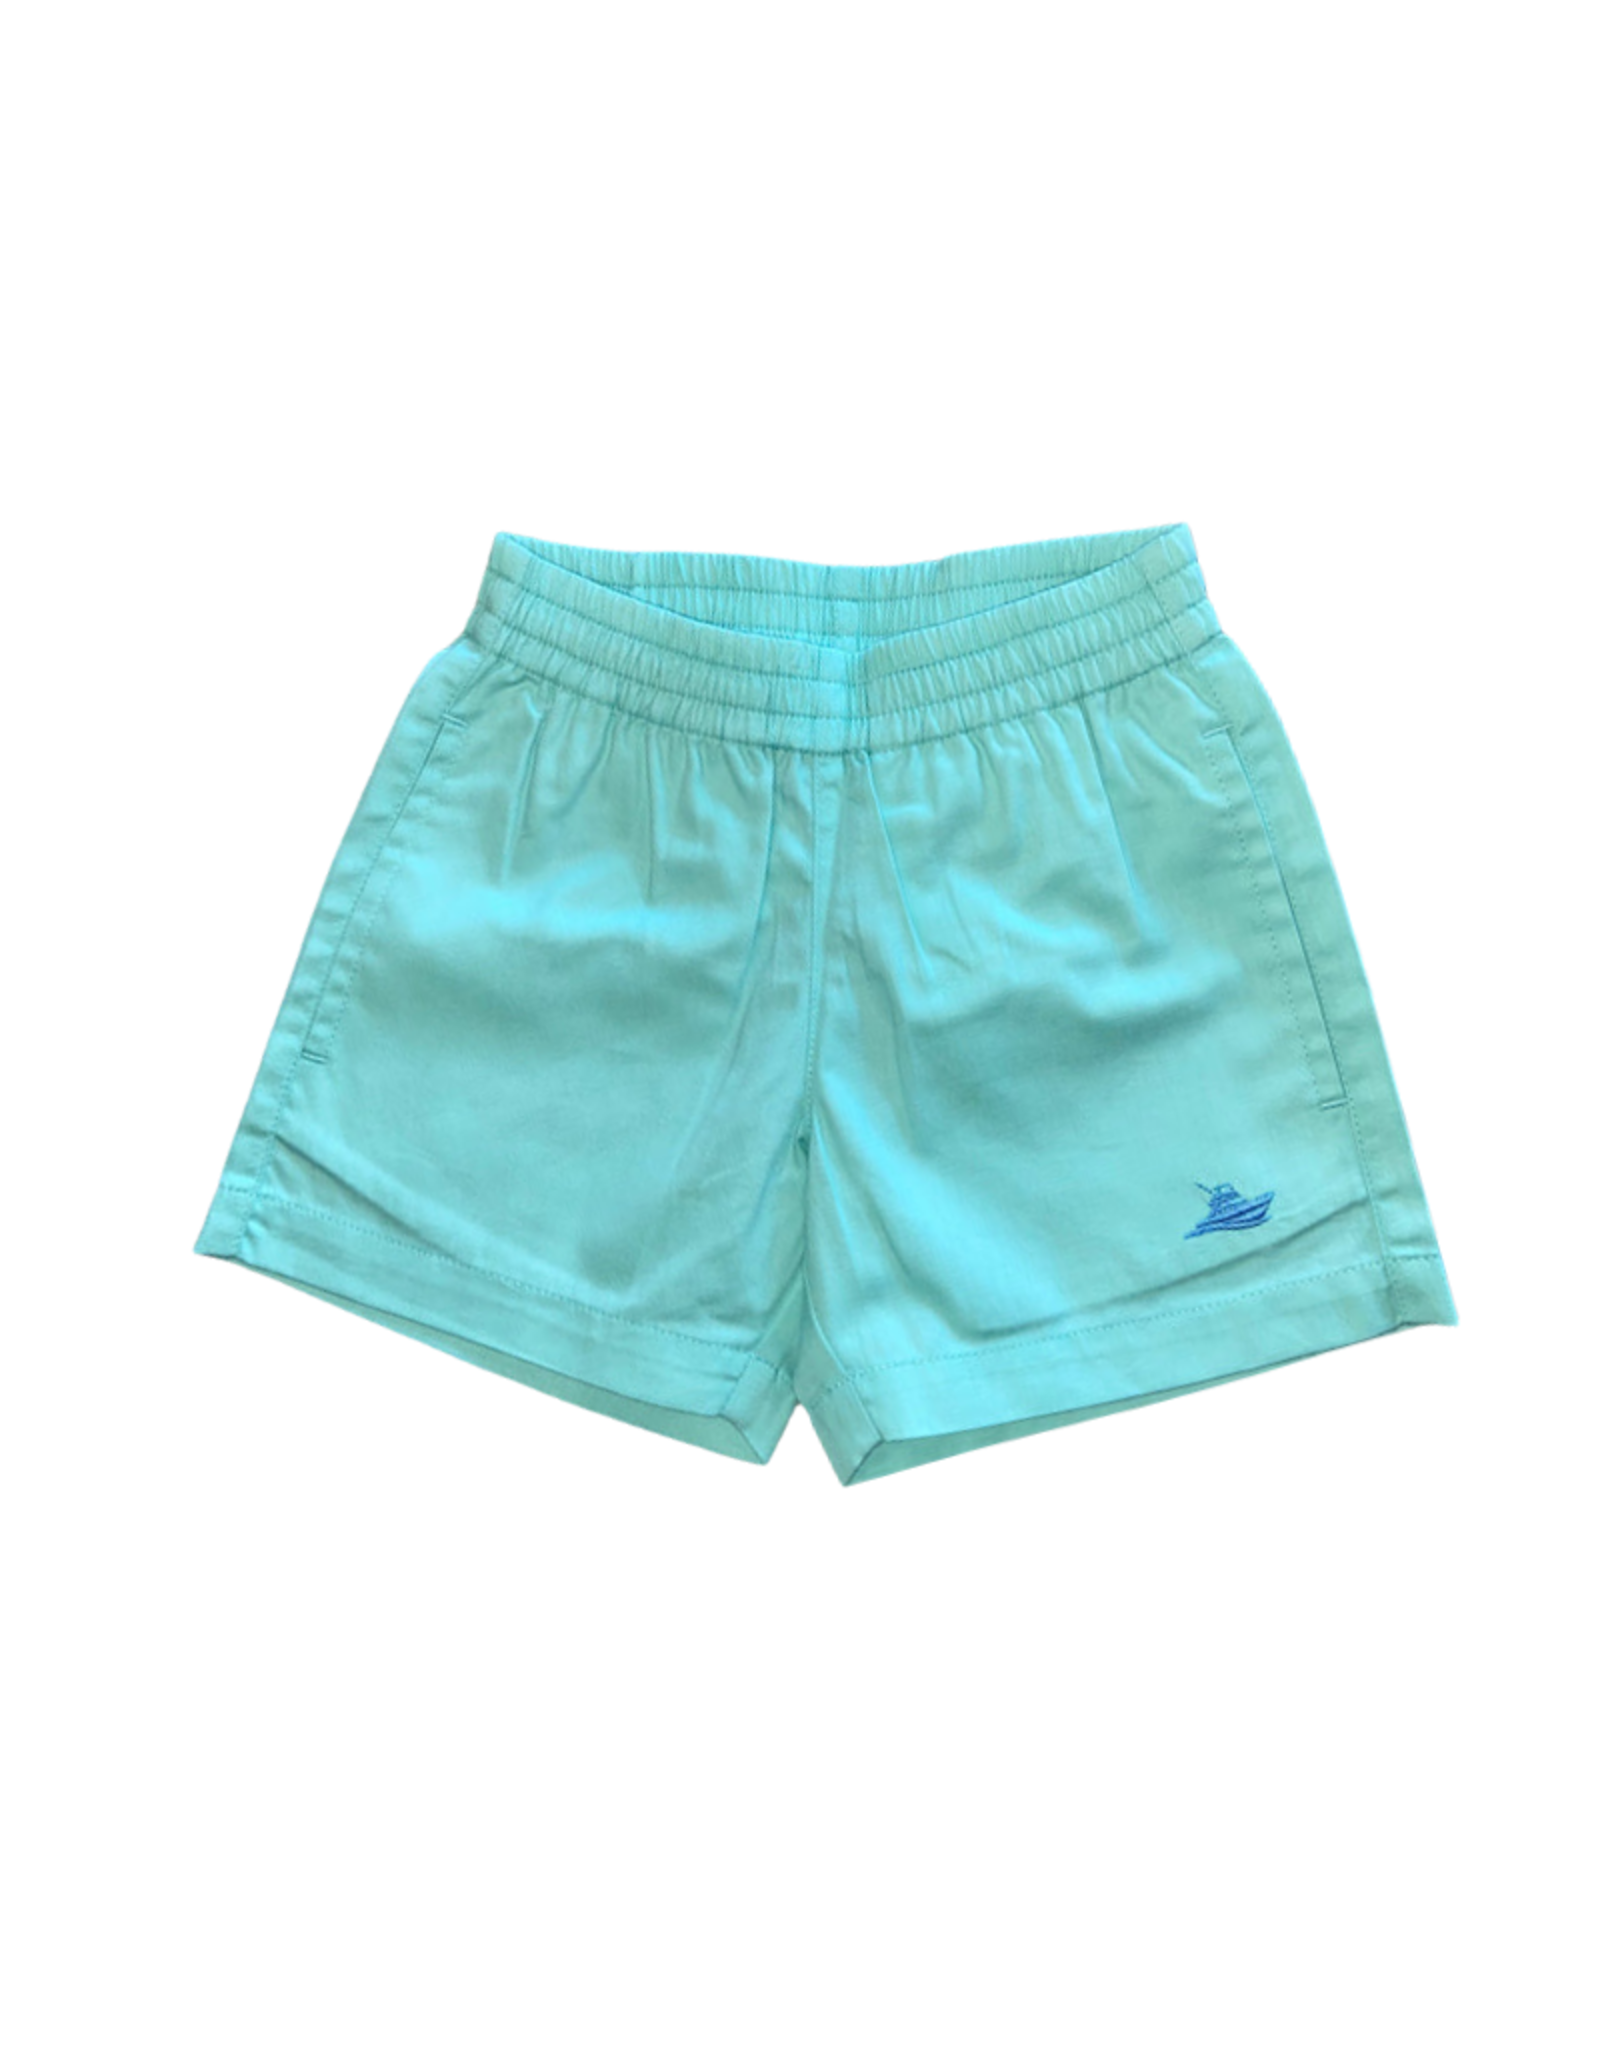 SouthBound Play Shorts Ocean Blue